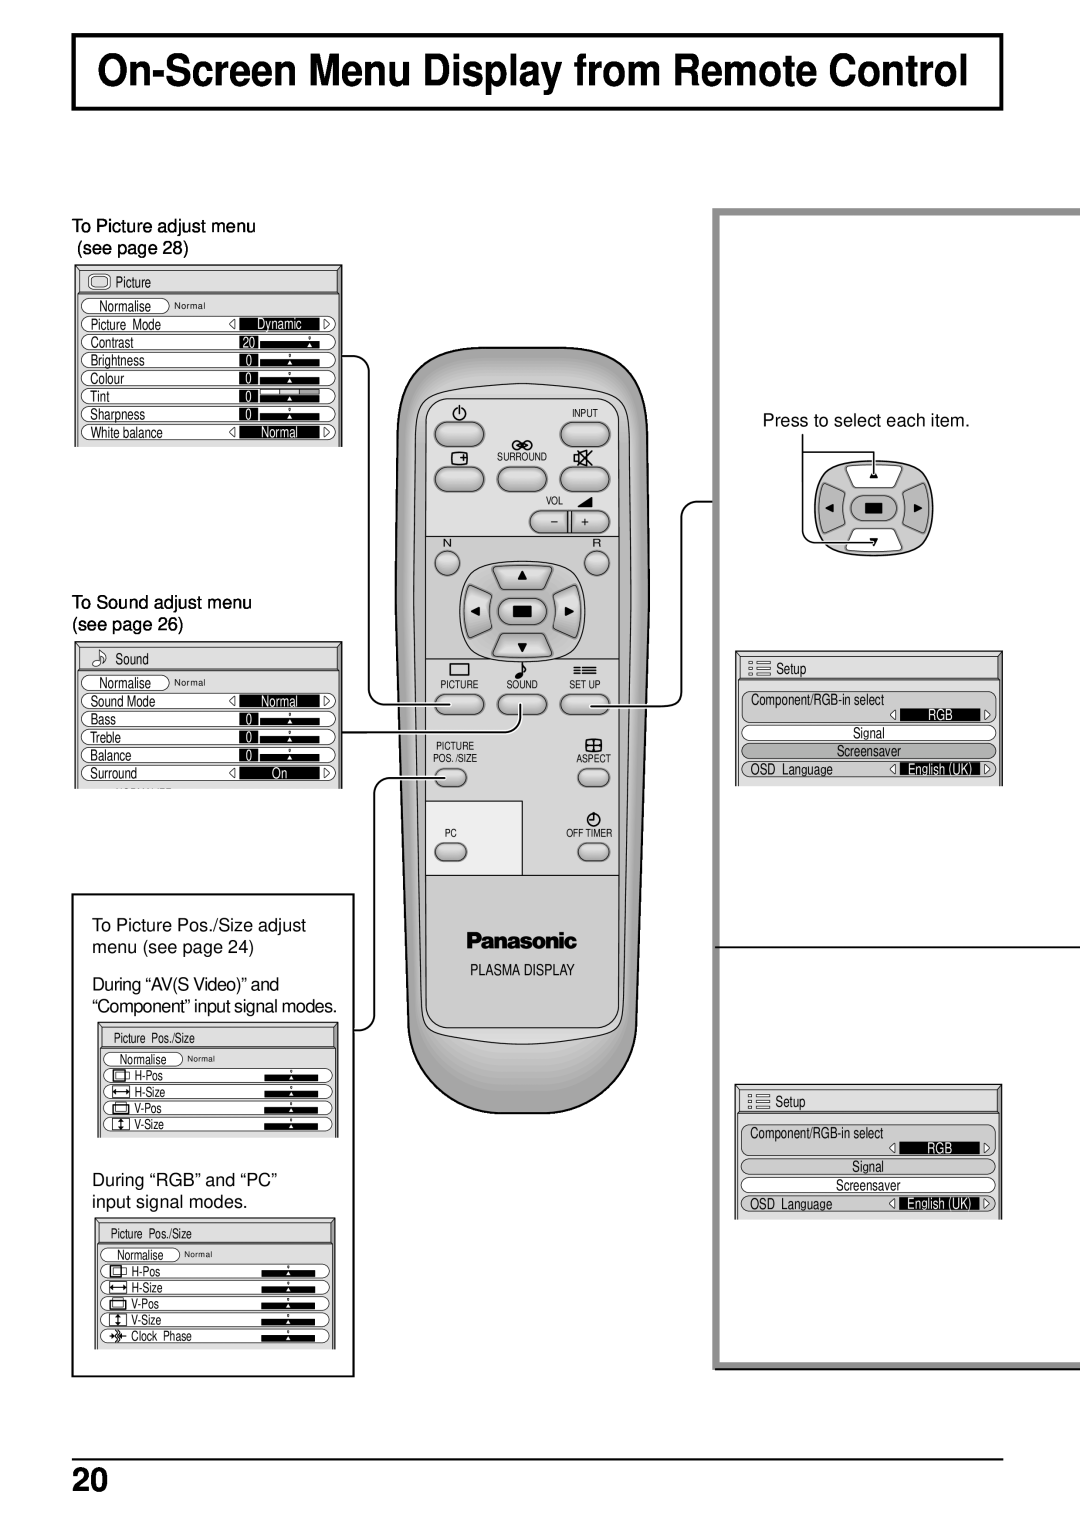 Panasonic TH-50PHW5, TH-42PHW5 manual On-Screen Menu Display from Remote Control, Pos. /Size 